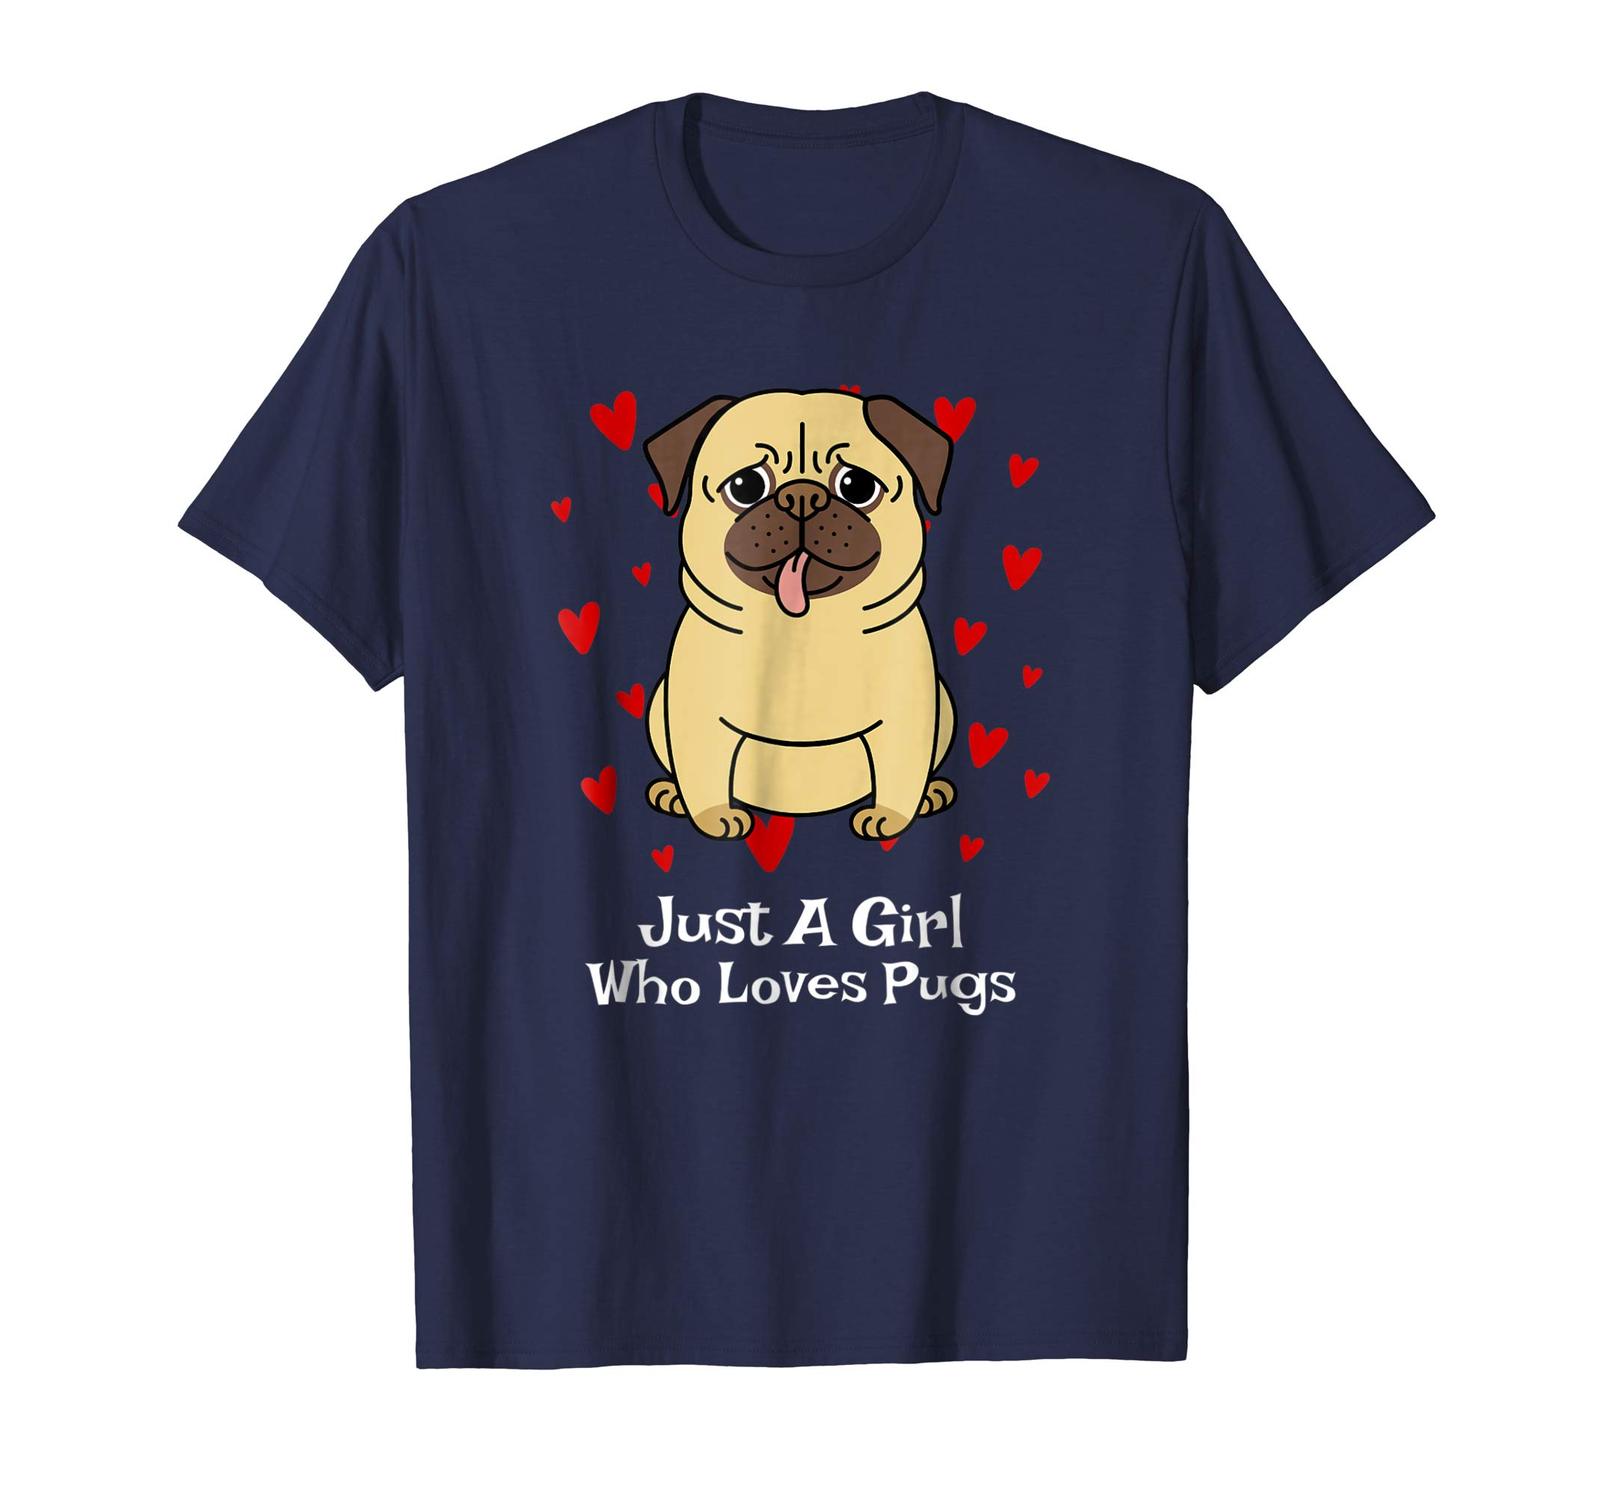 Dog Fashion - Pug Gifts For Girls Funny Just A Girl Who Loves Pugs T-Shirt Men